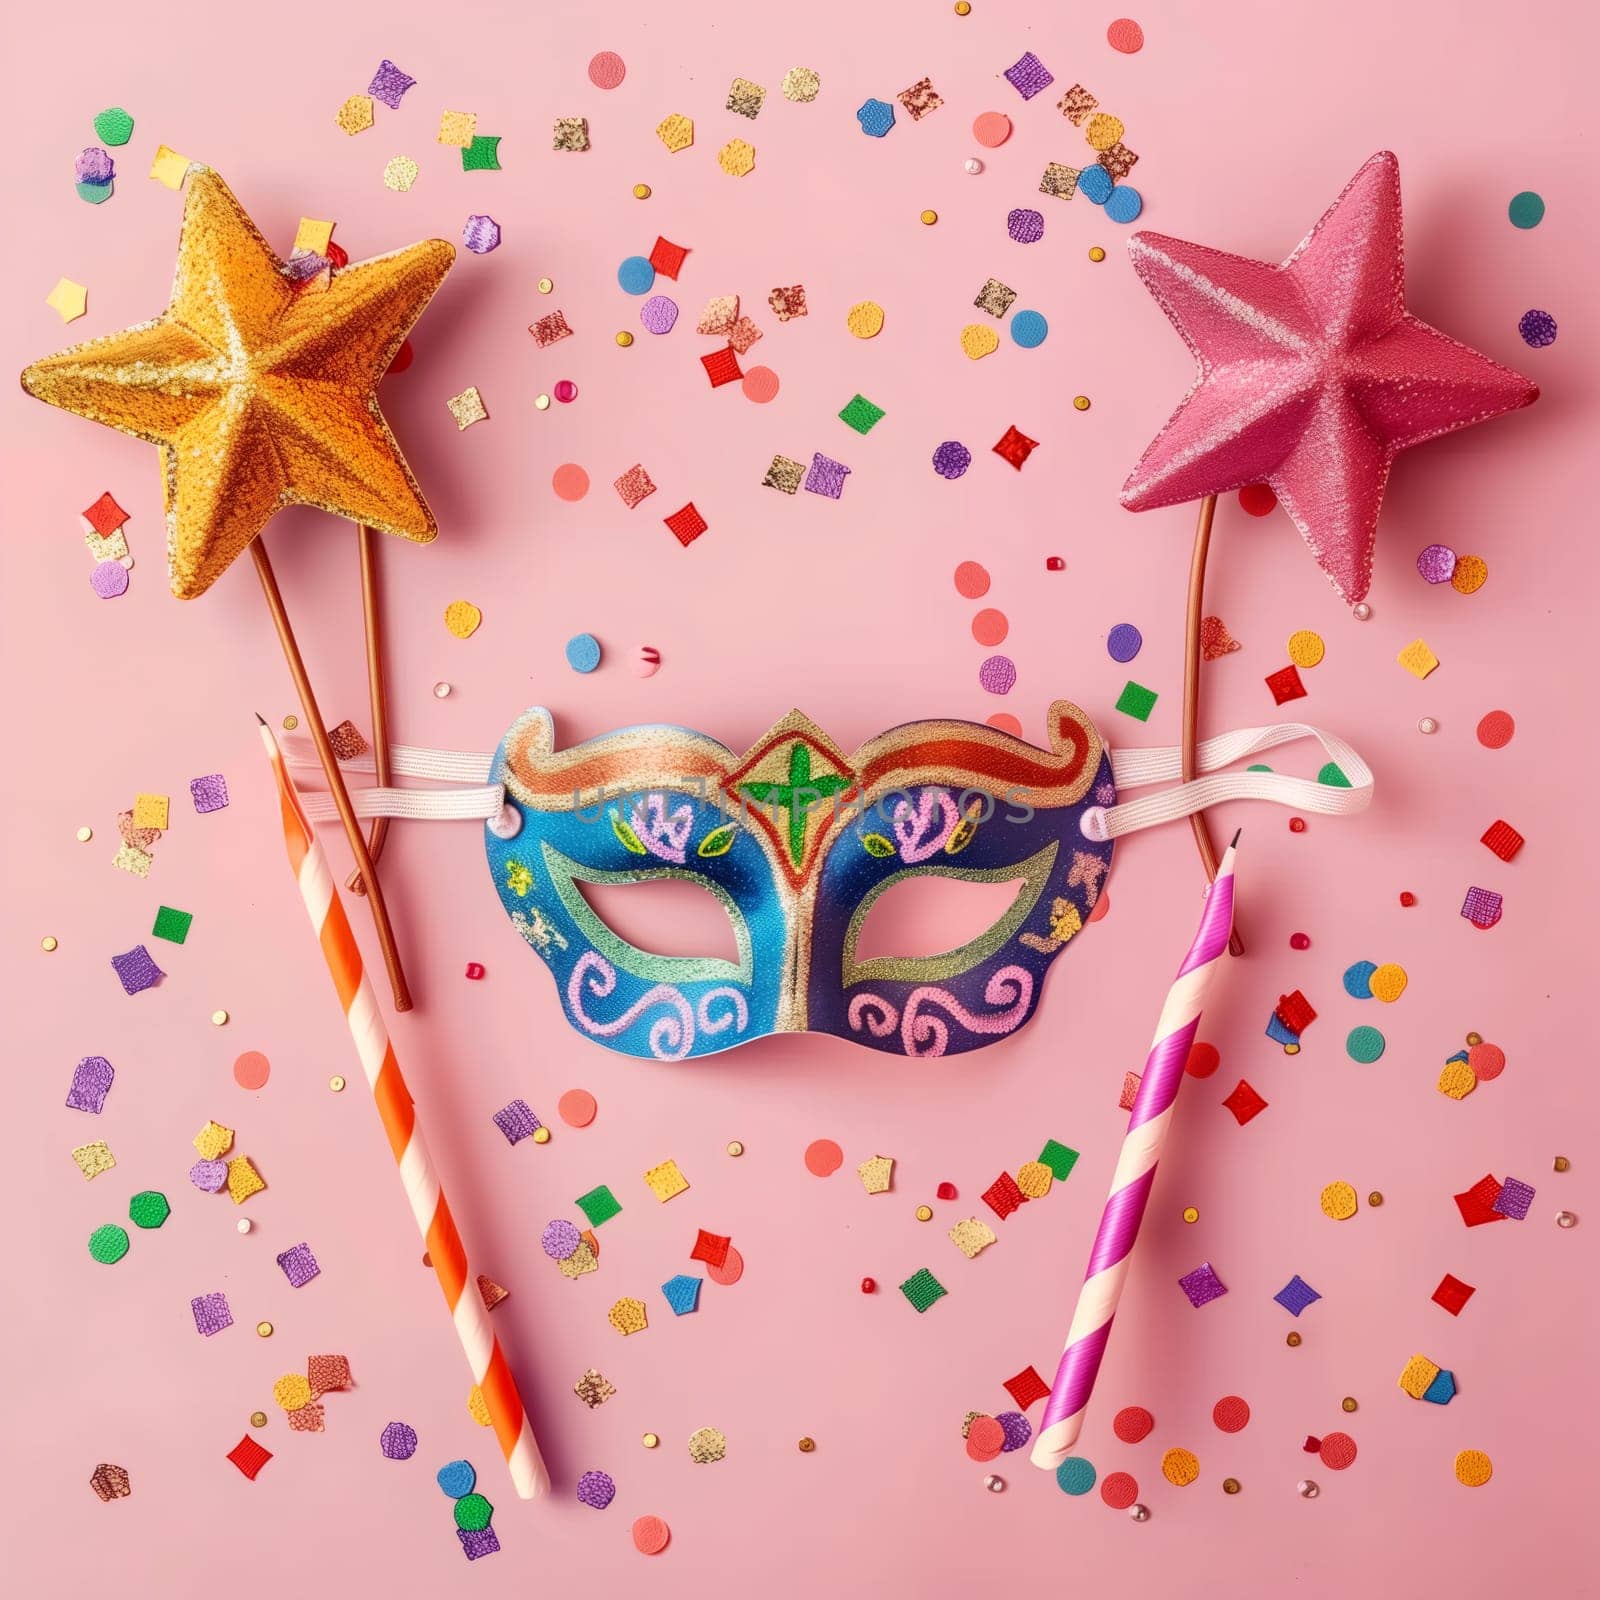 One colorful masquerade mask with two candles, two stars and scattered confetti on a pink background, flat lay close-up.